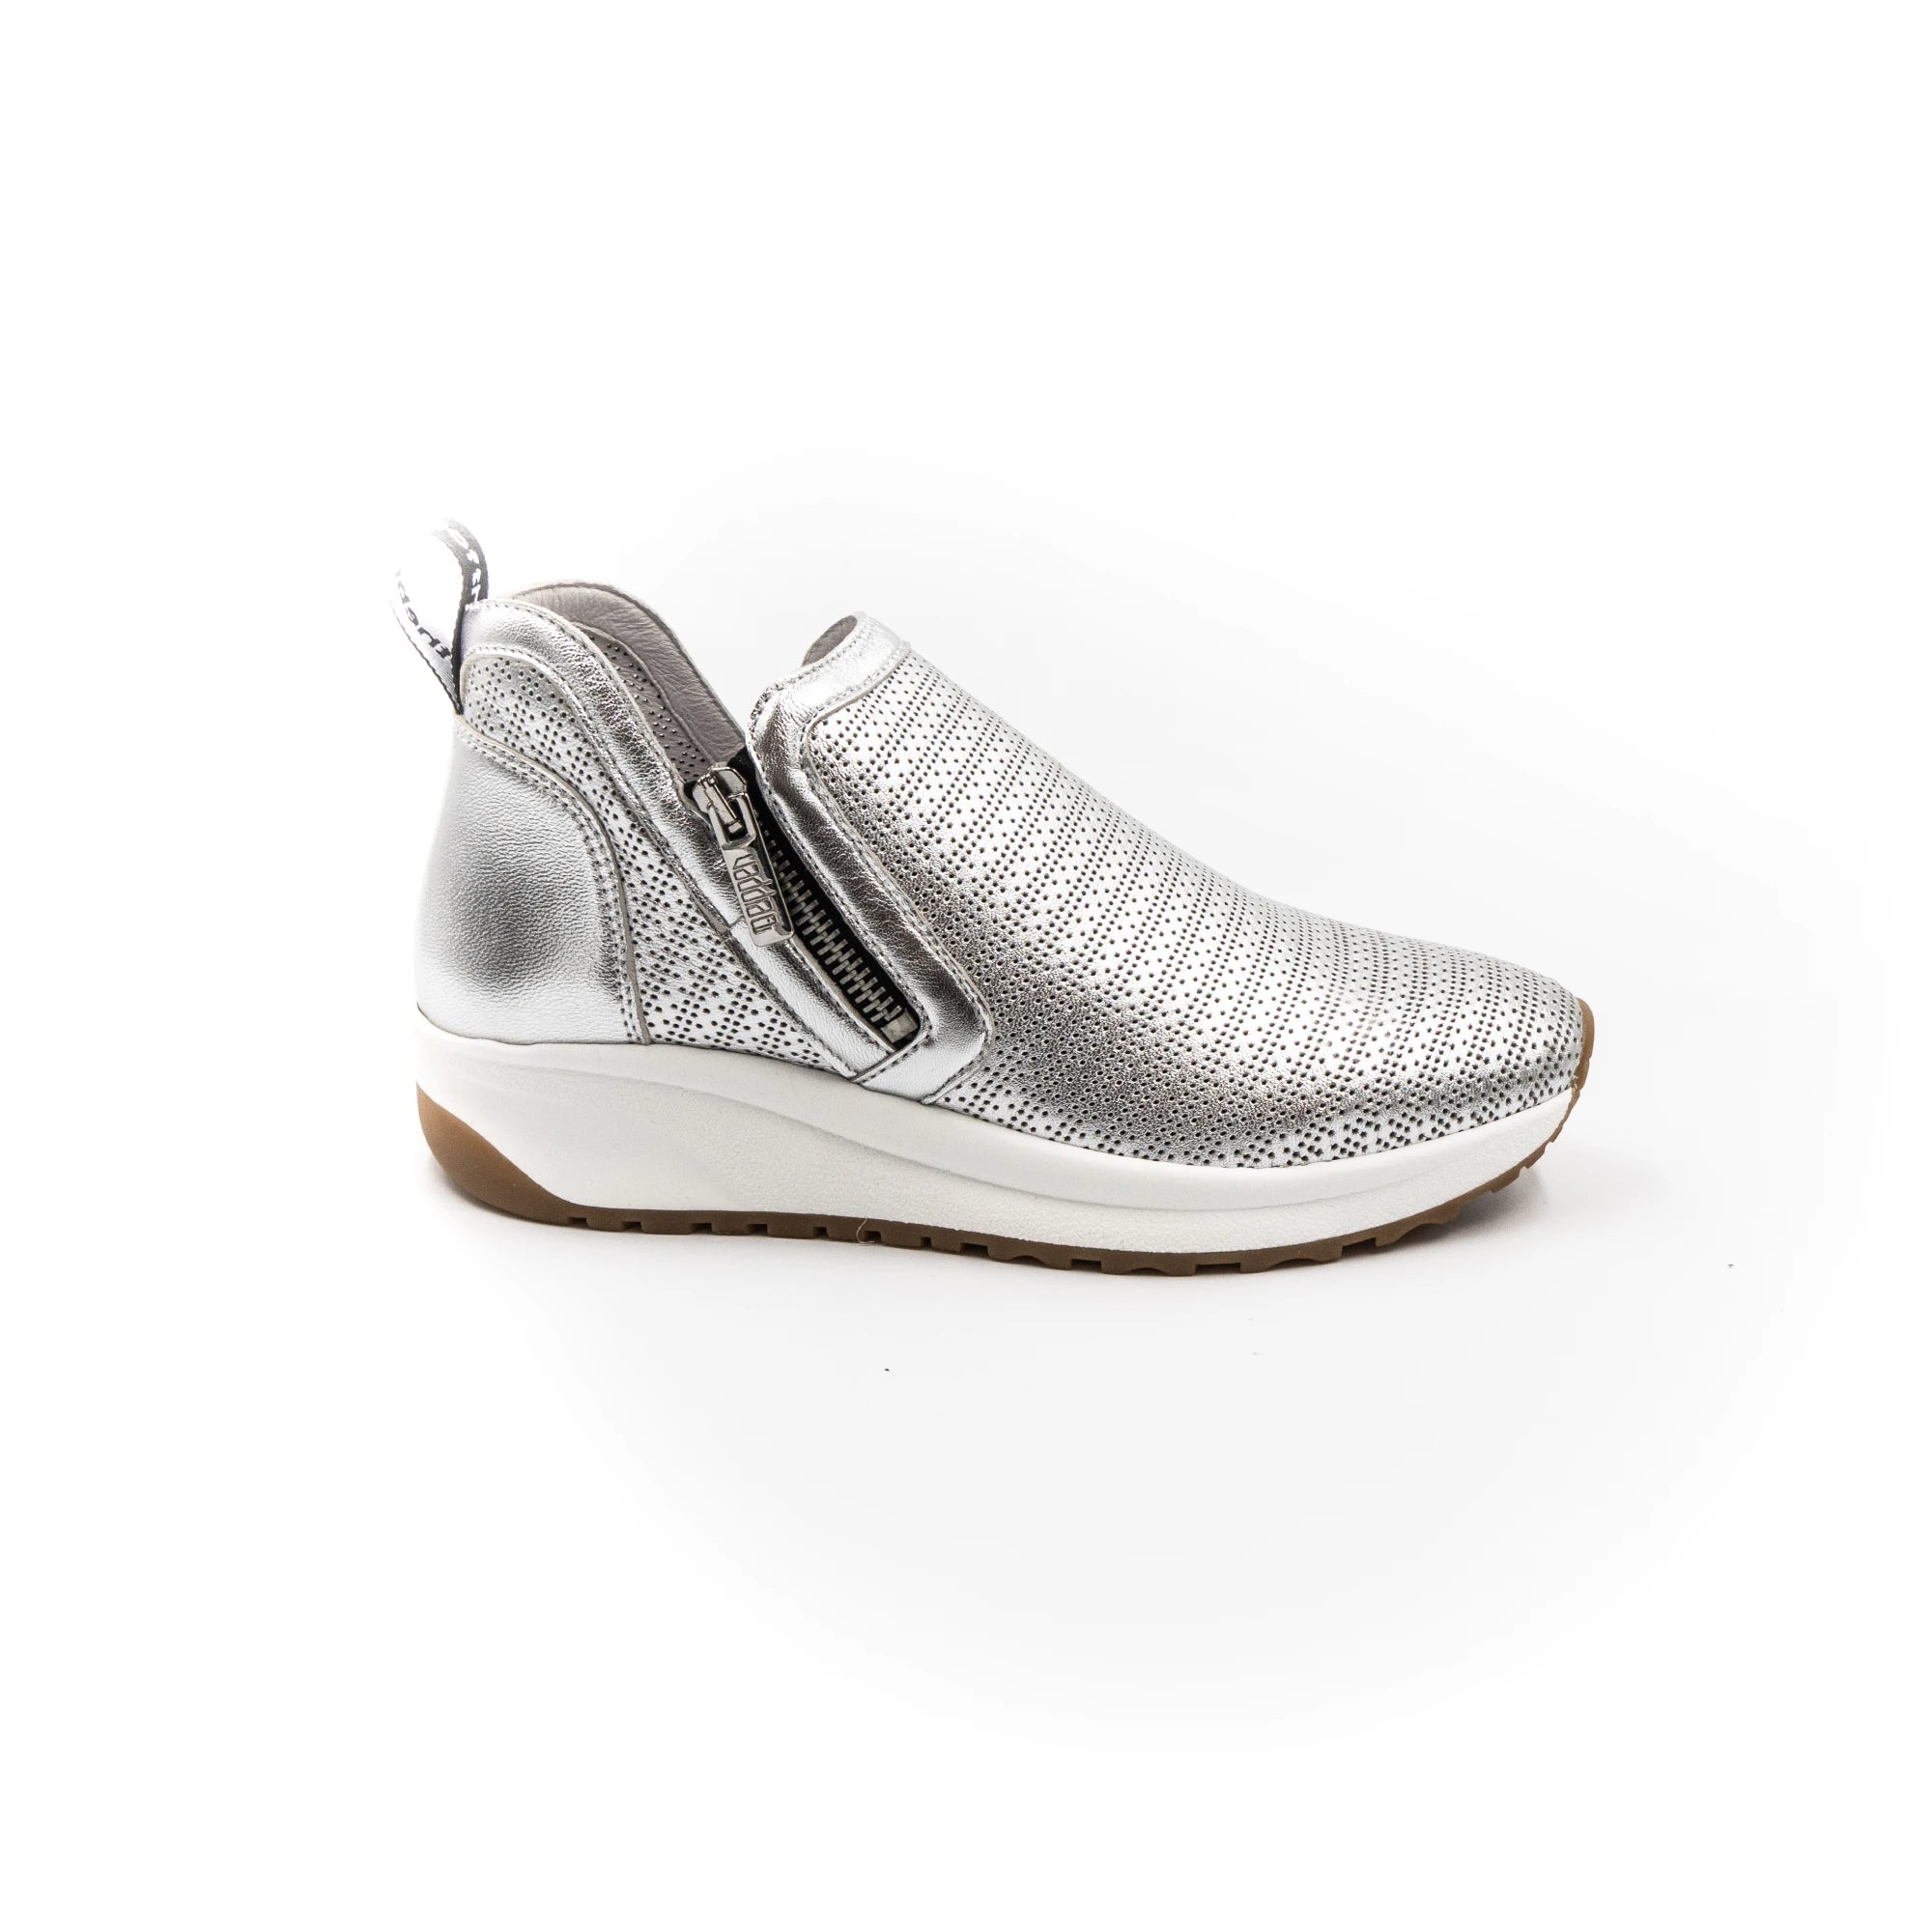 Silver-toned sneakers with zippers.